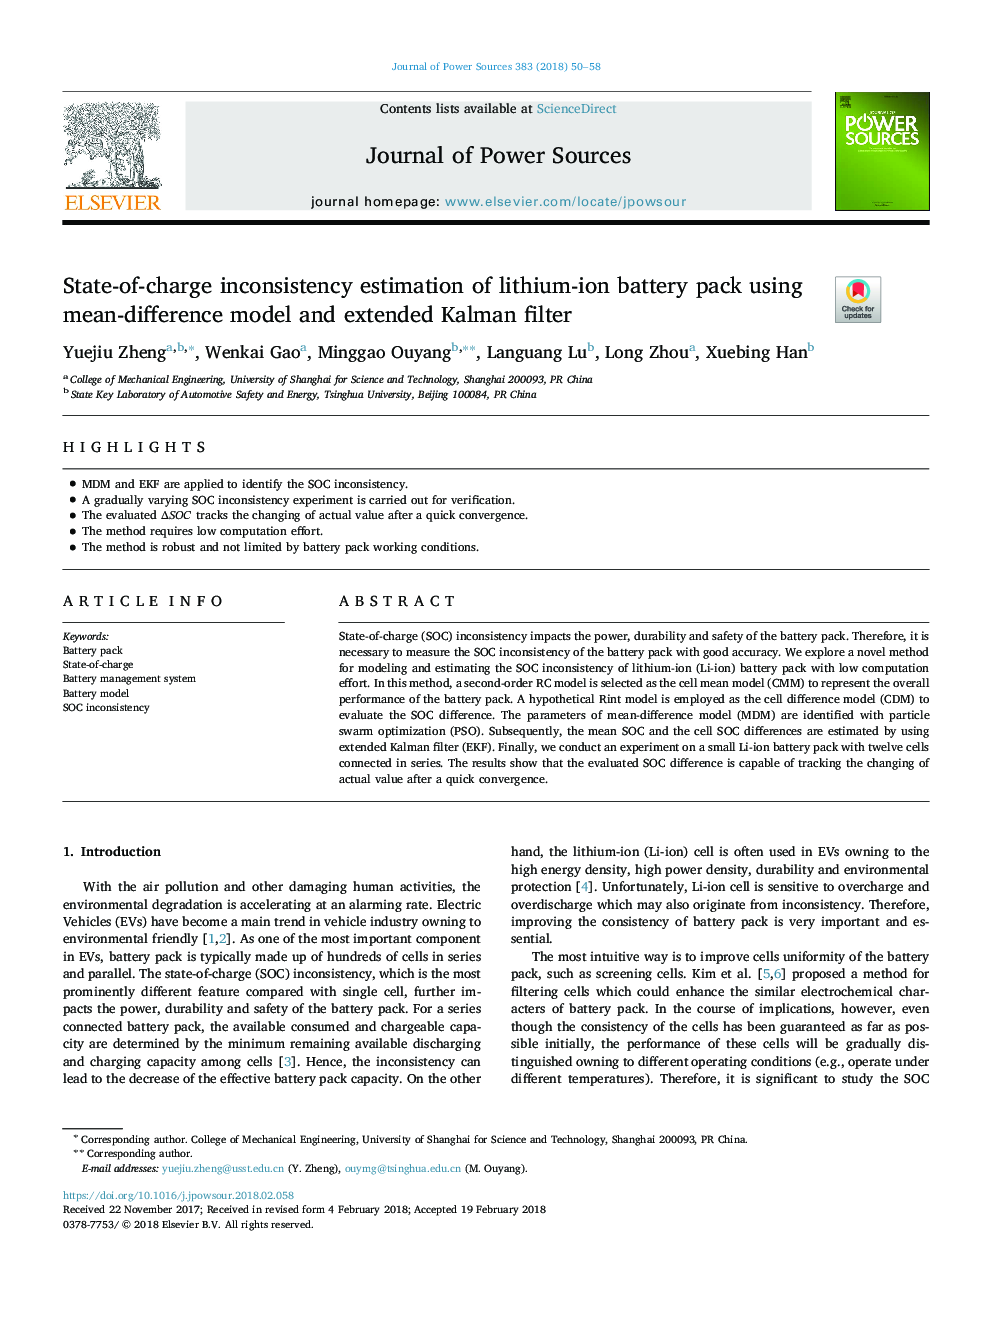 State-of-charge inconsistency estimation of lithium-ion battery pack using mean-difference model and extended Kalman filter